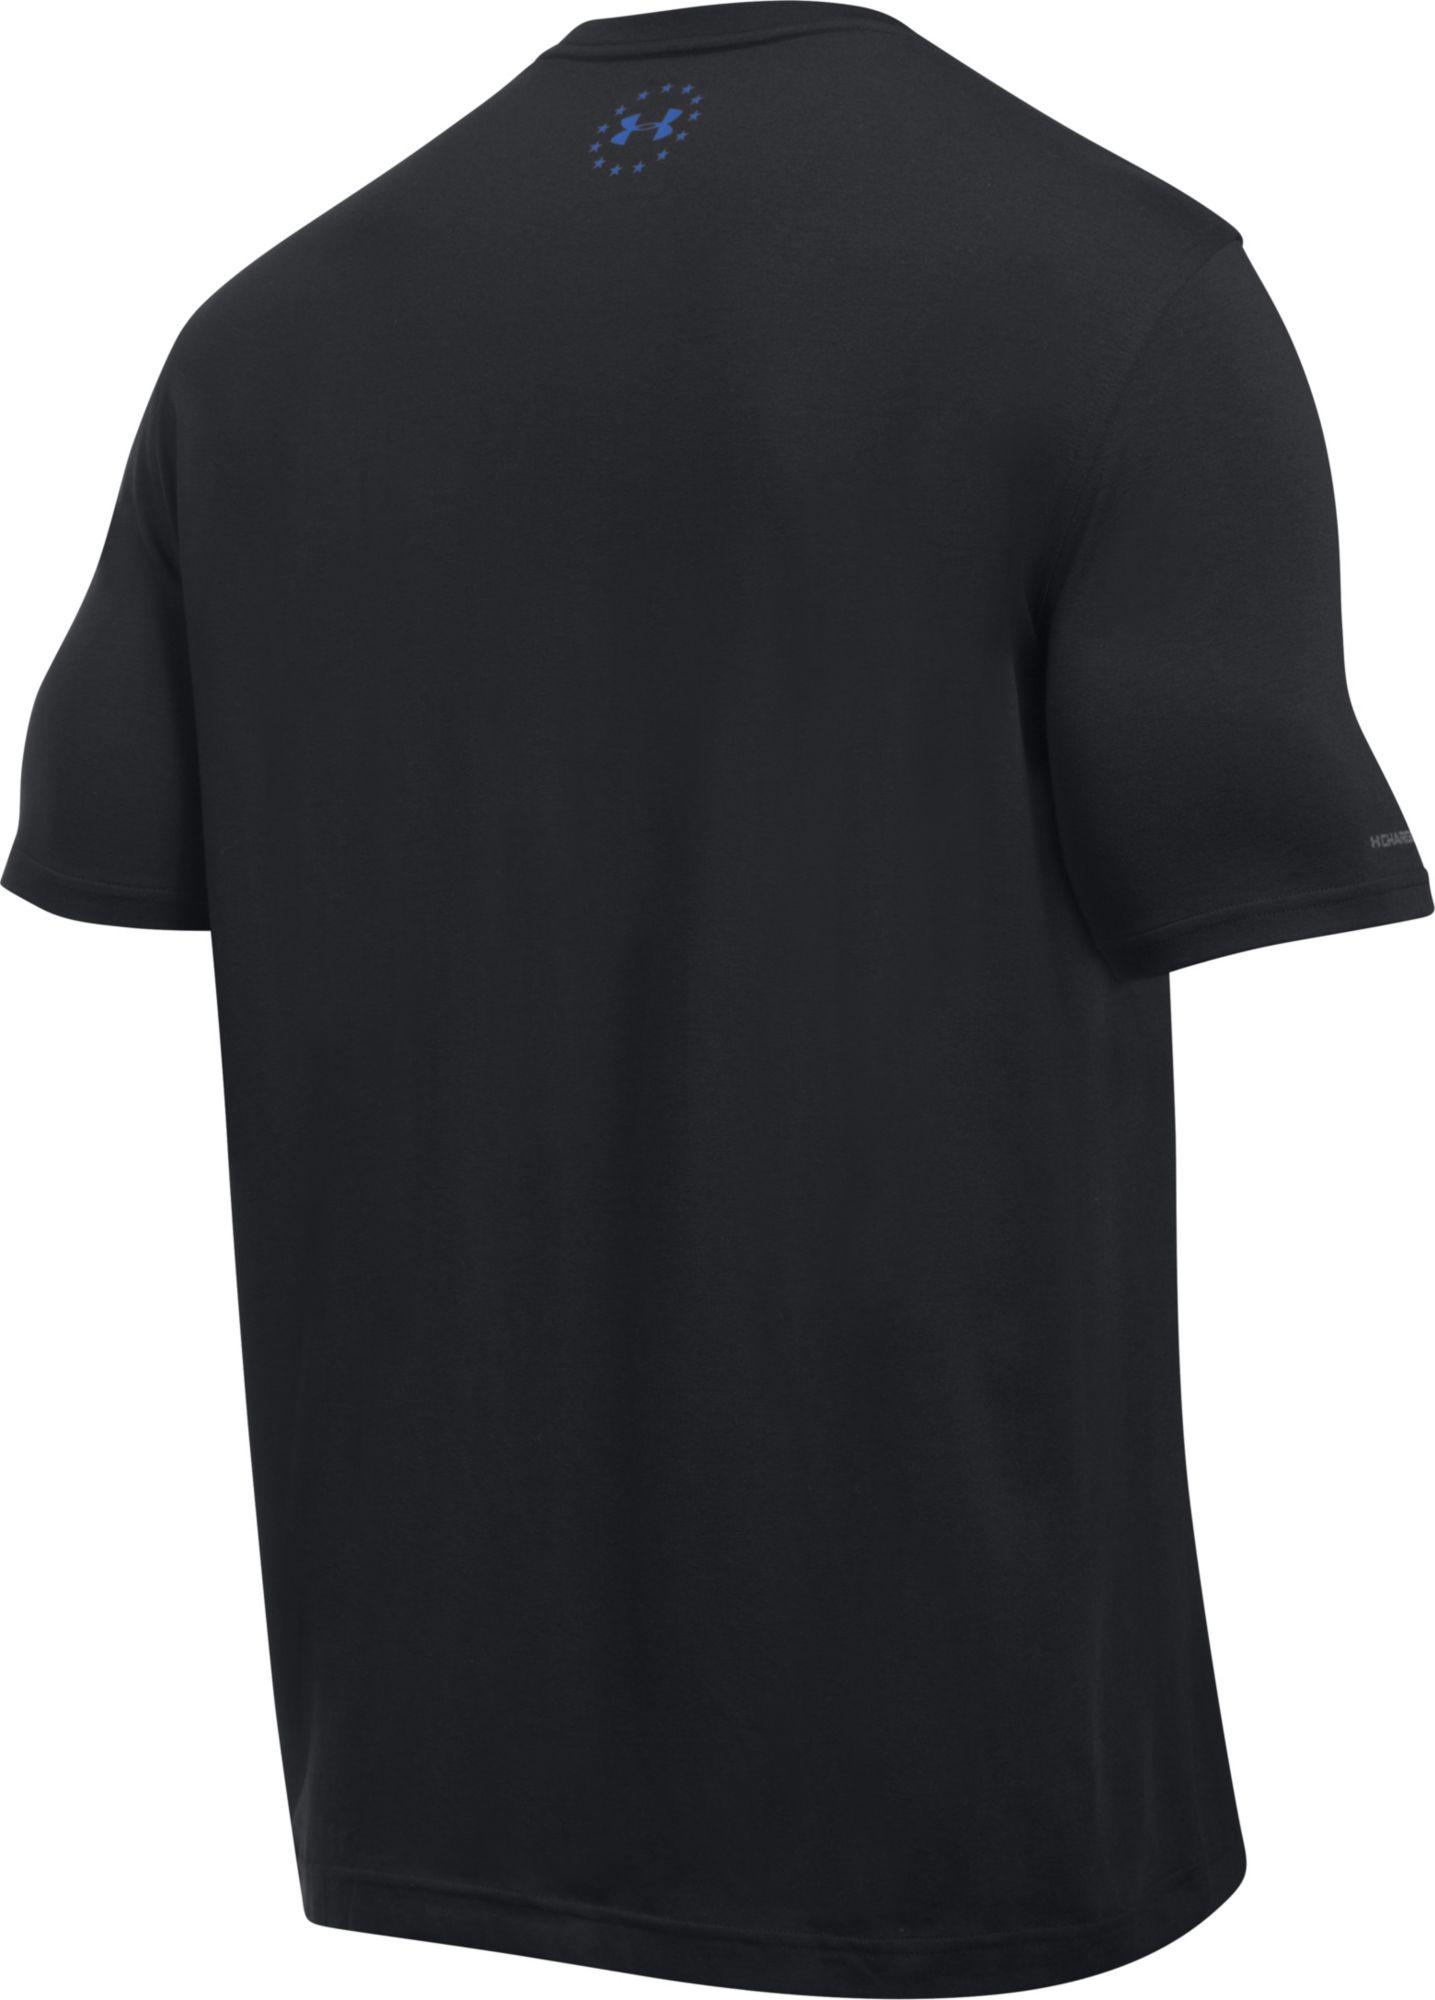 Download Lyst - Under Armour Police Thin Blue Line T-shirt in Black ...